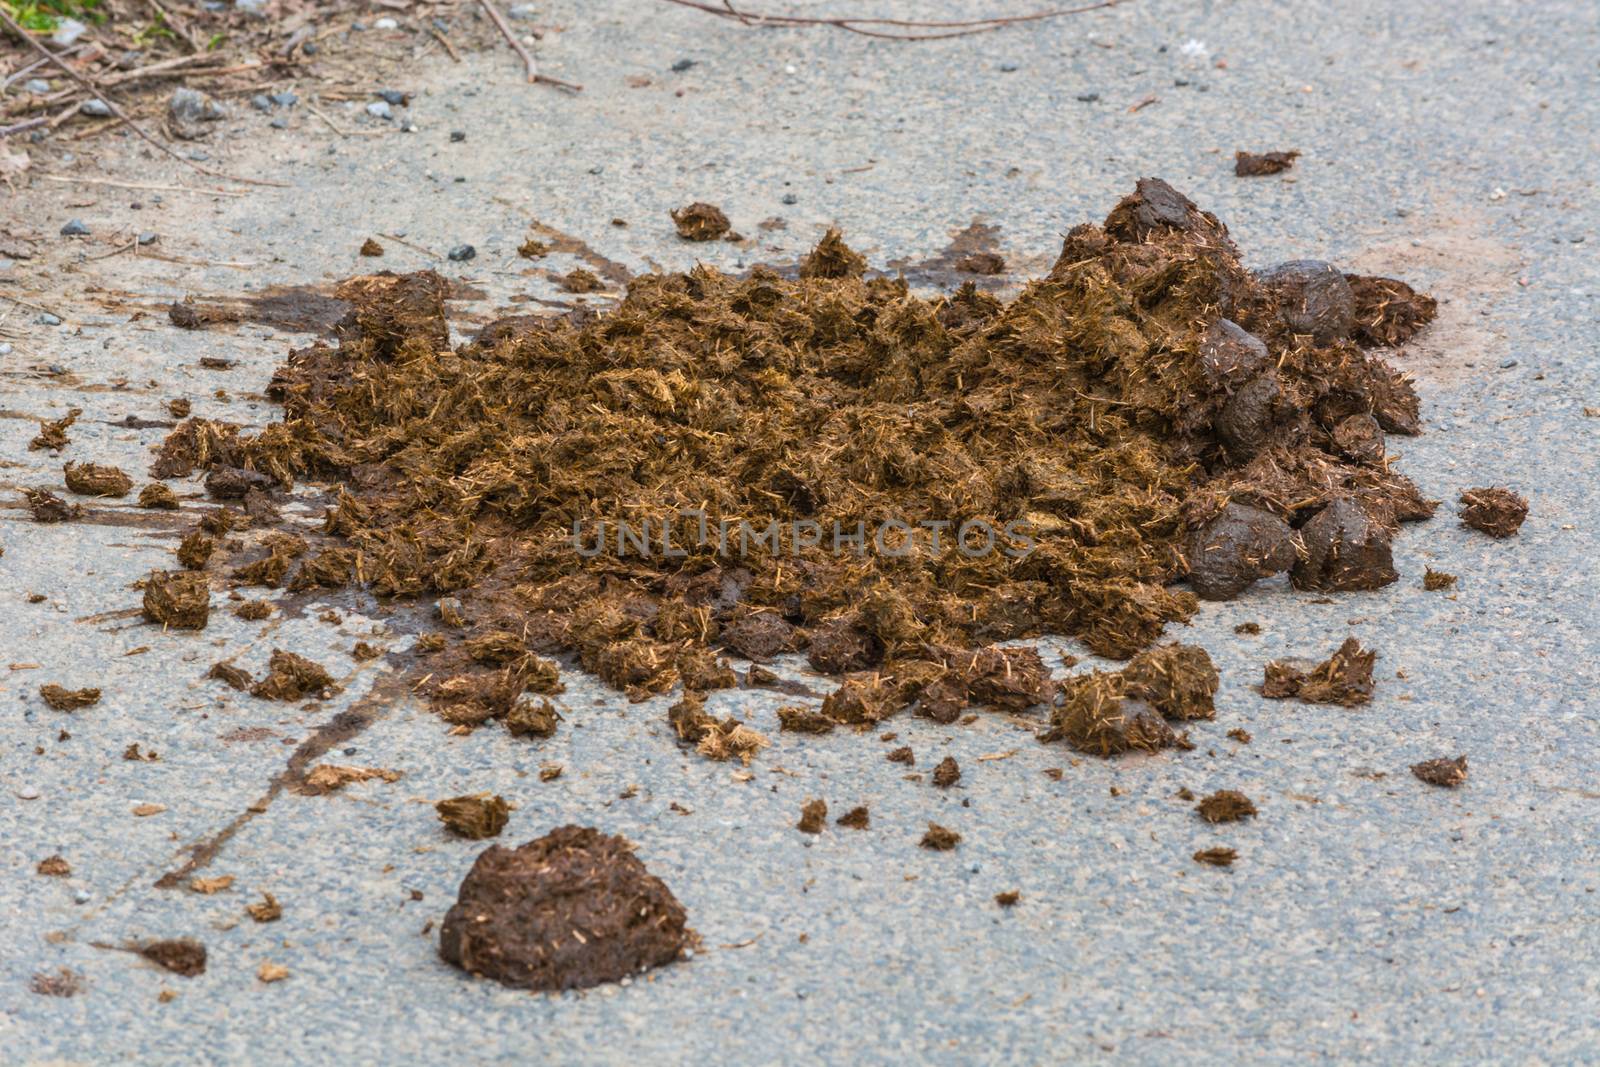 Horse Feces by JFsPic